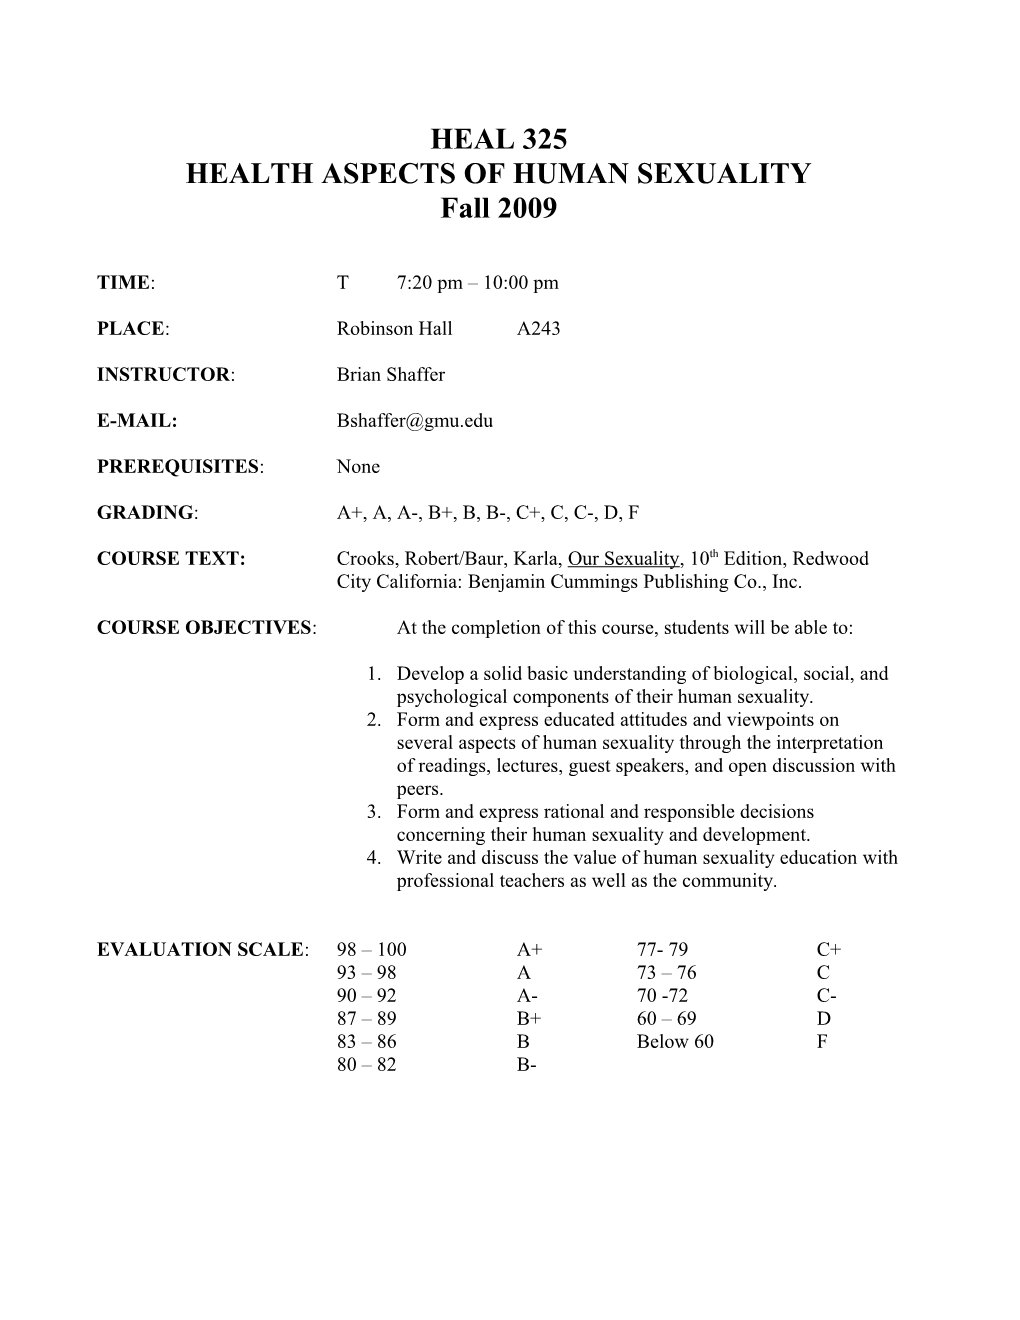 Health Aspects of Human Sexuality